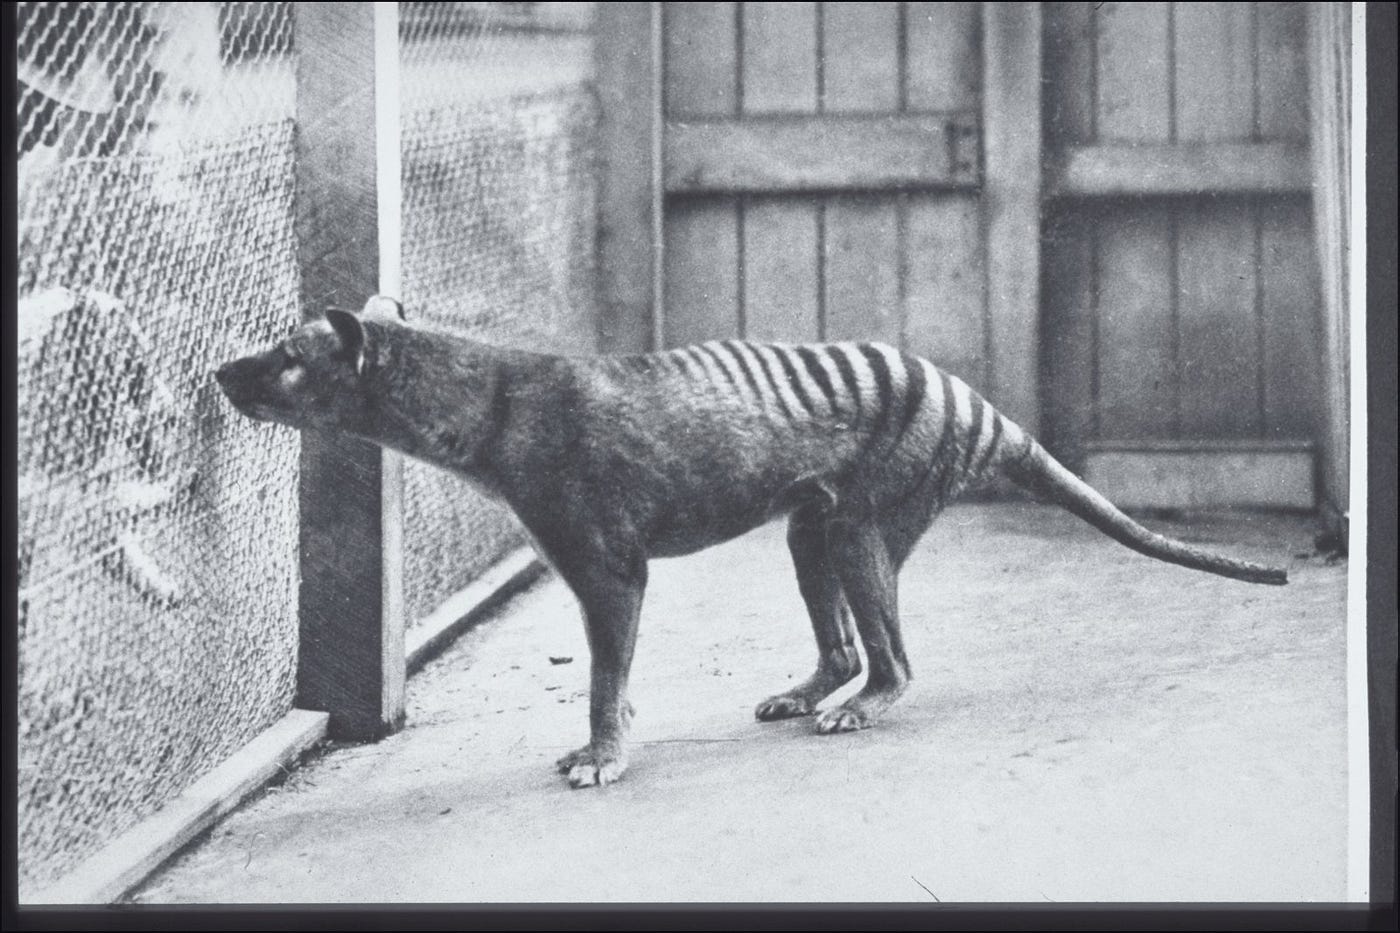 Genome of the Tasmanian tiger provides insights into the evolution